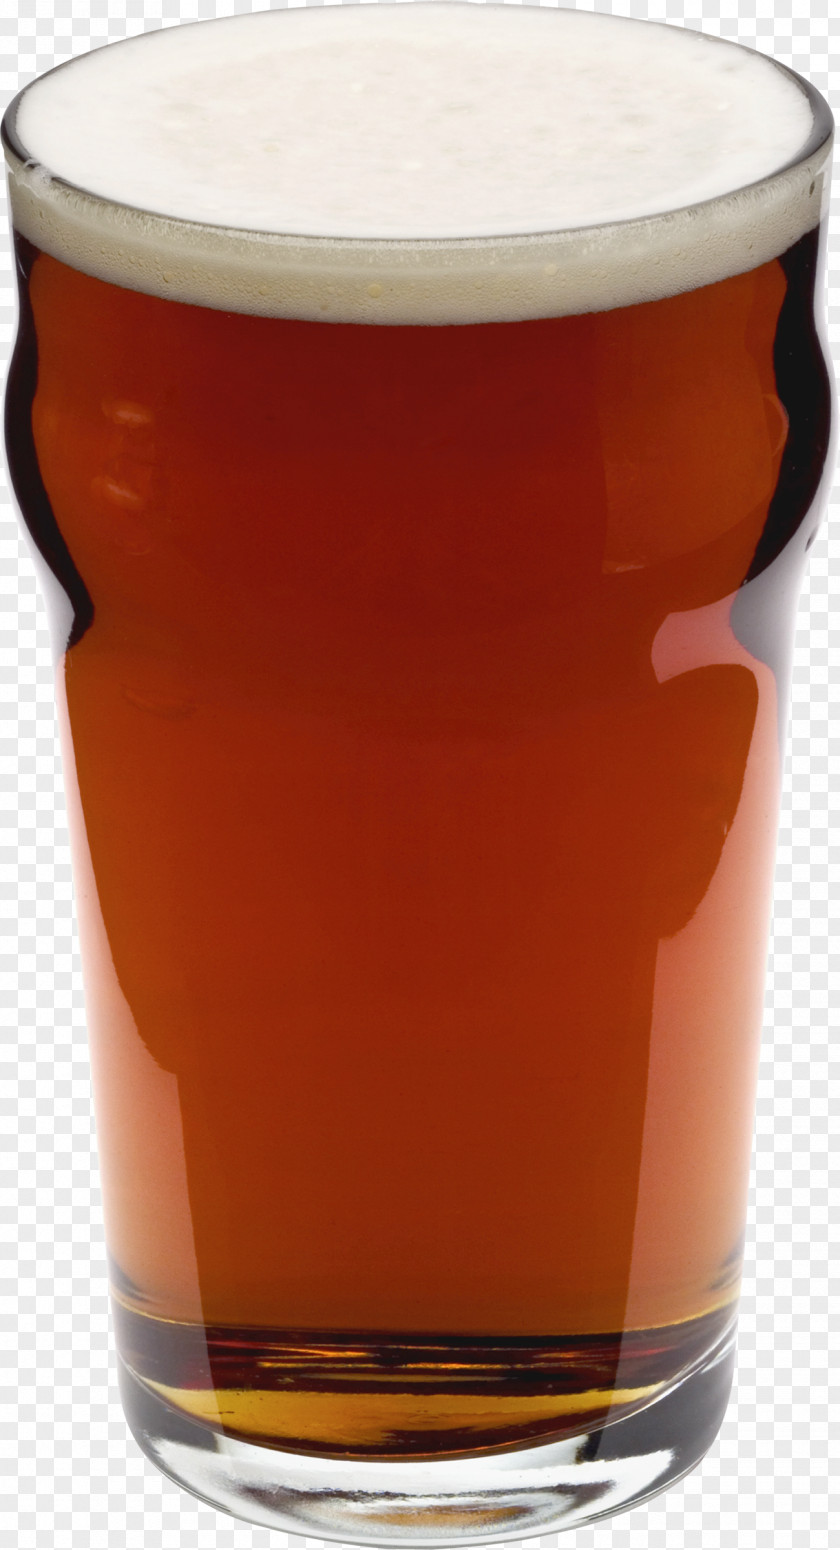 Beer Ale Cocktail Pint Glass Crayfish As Food PNG